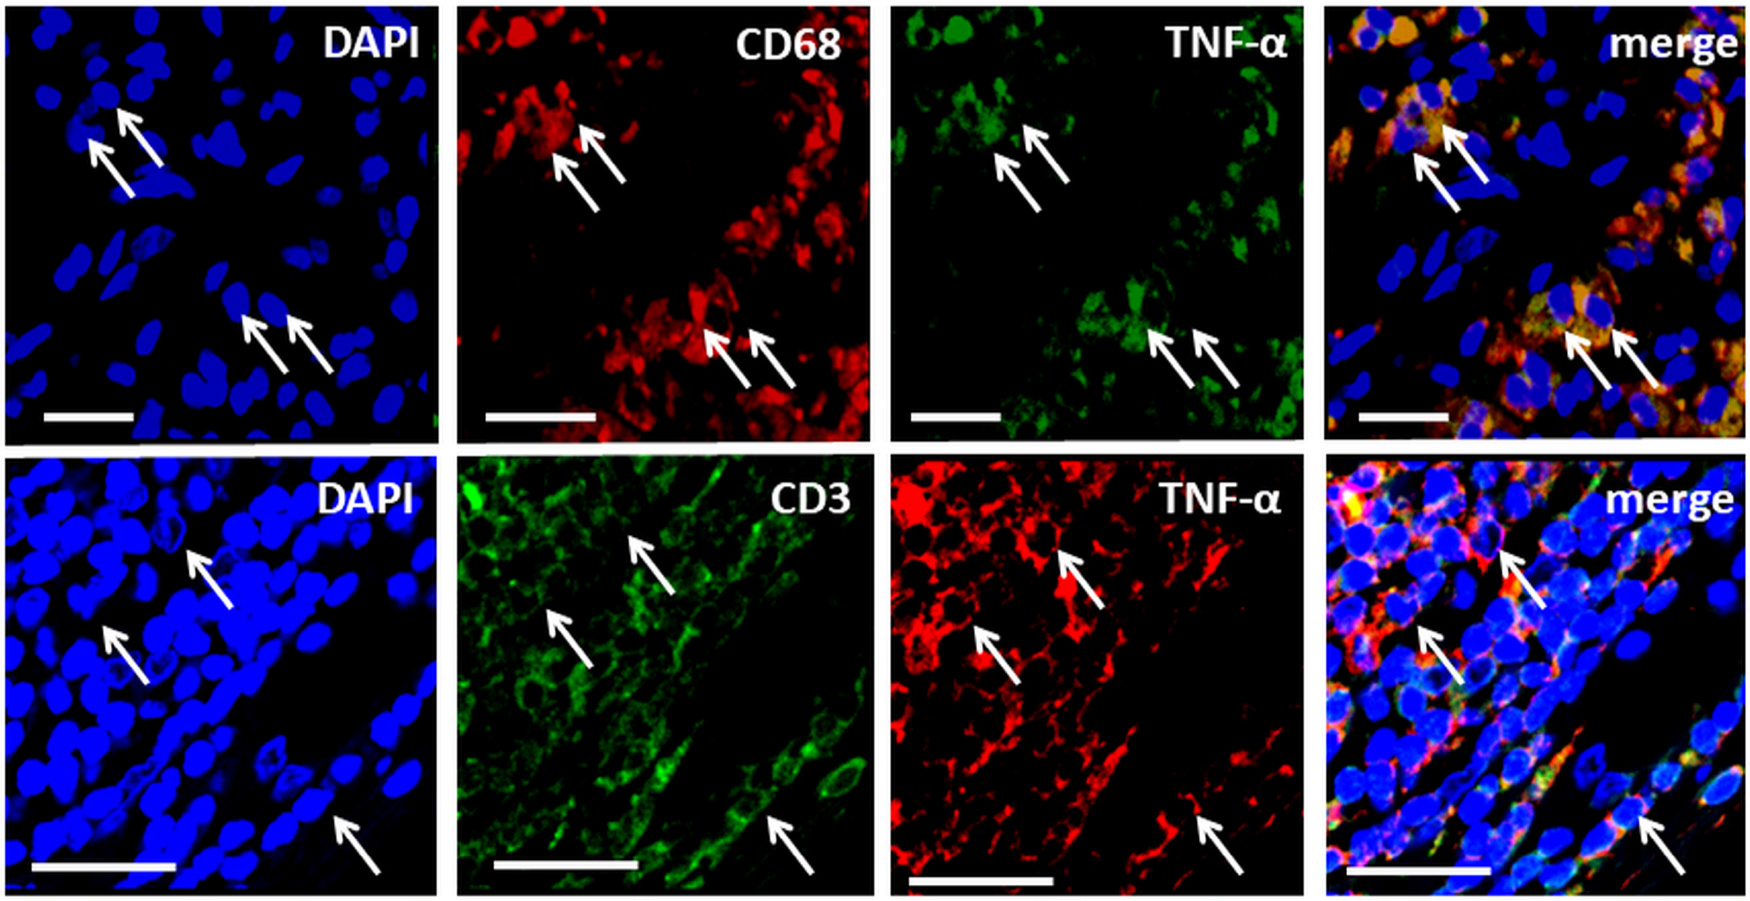 Fig. 2 
            Double-immunofluorescence demonstrating colocalization of tumour necrosis factor-alpha (TNF-α) with the macrophage marker Cluster of Differentiation 68 (CD68) (upper panel) and the pan T-cell marker Cluster of Differentiation 3 (CD3) (lower panel). Nuclei are stained with 4′,6-diamidino-2-phenylindole (DAPI). Scale bars = 50 μm.
          